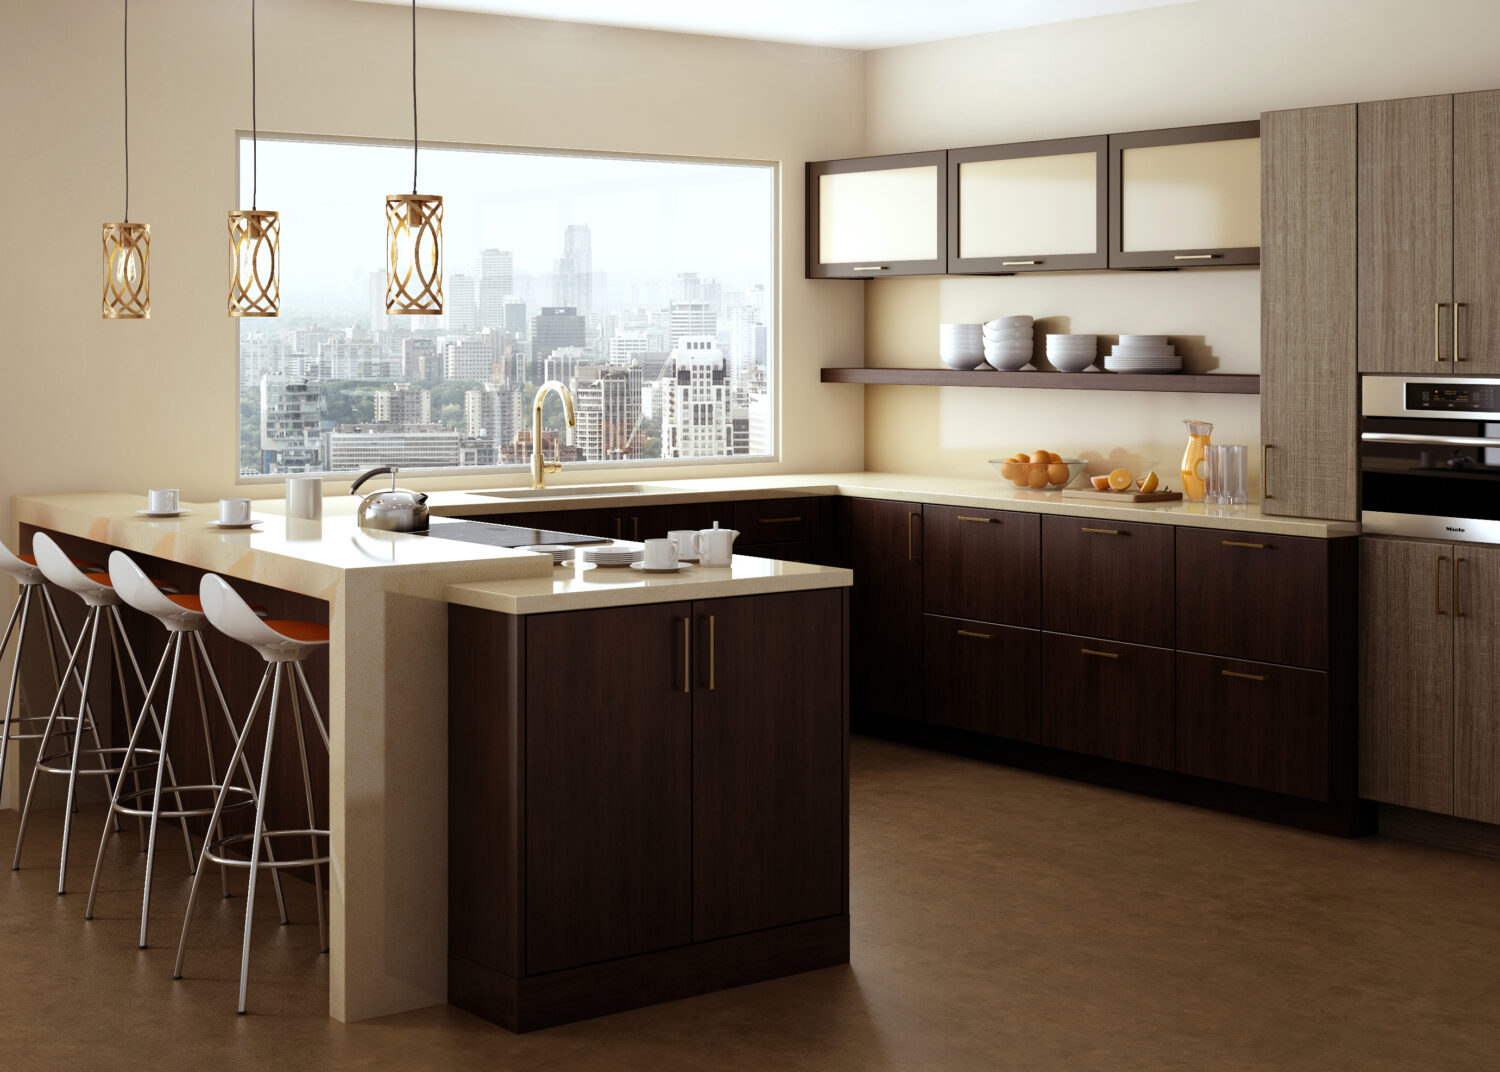 A city loft apartment with a stunning view and modern cabinets in a sleek and contemporary kitchen design. Featuring Dura Supreme frameless cabinets.